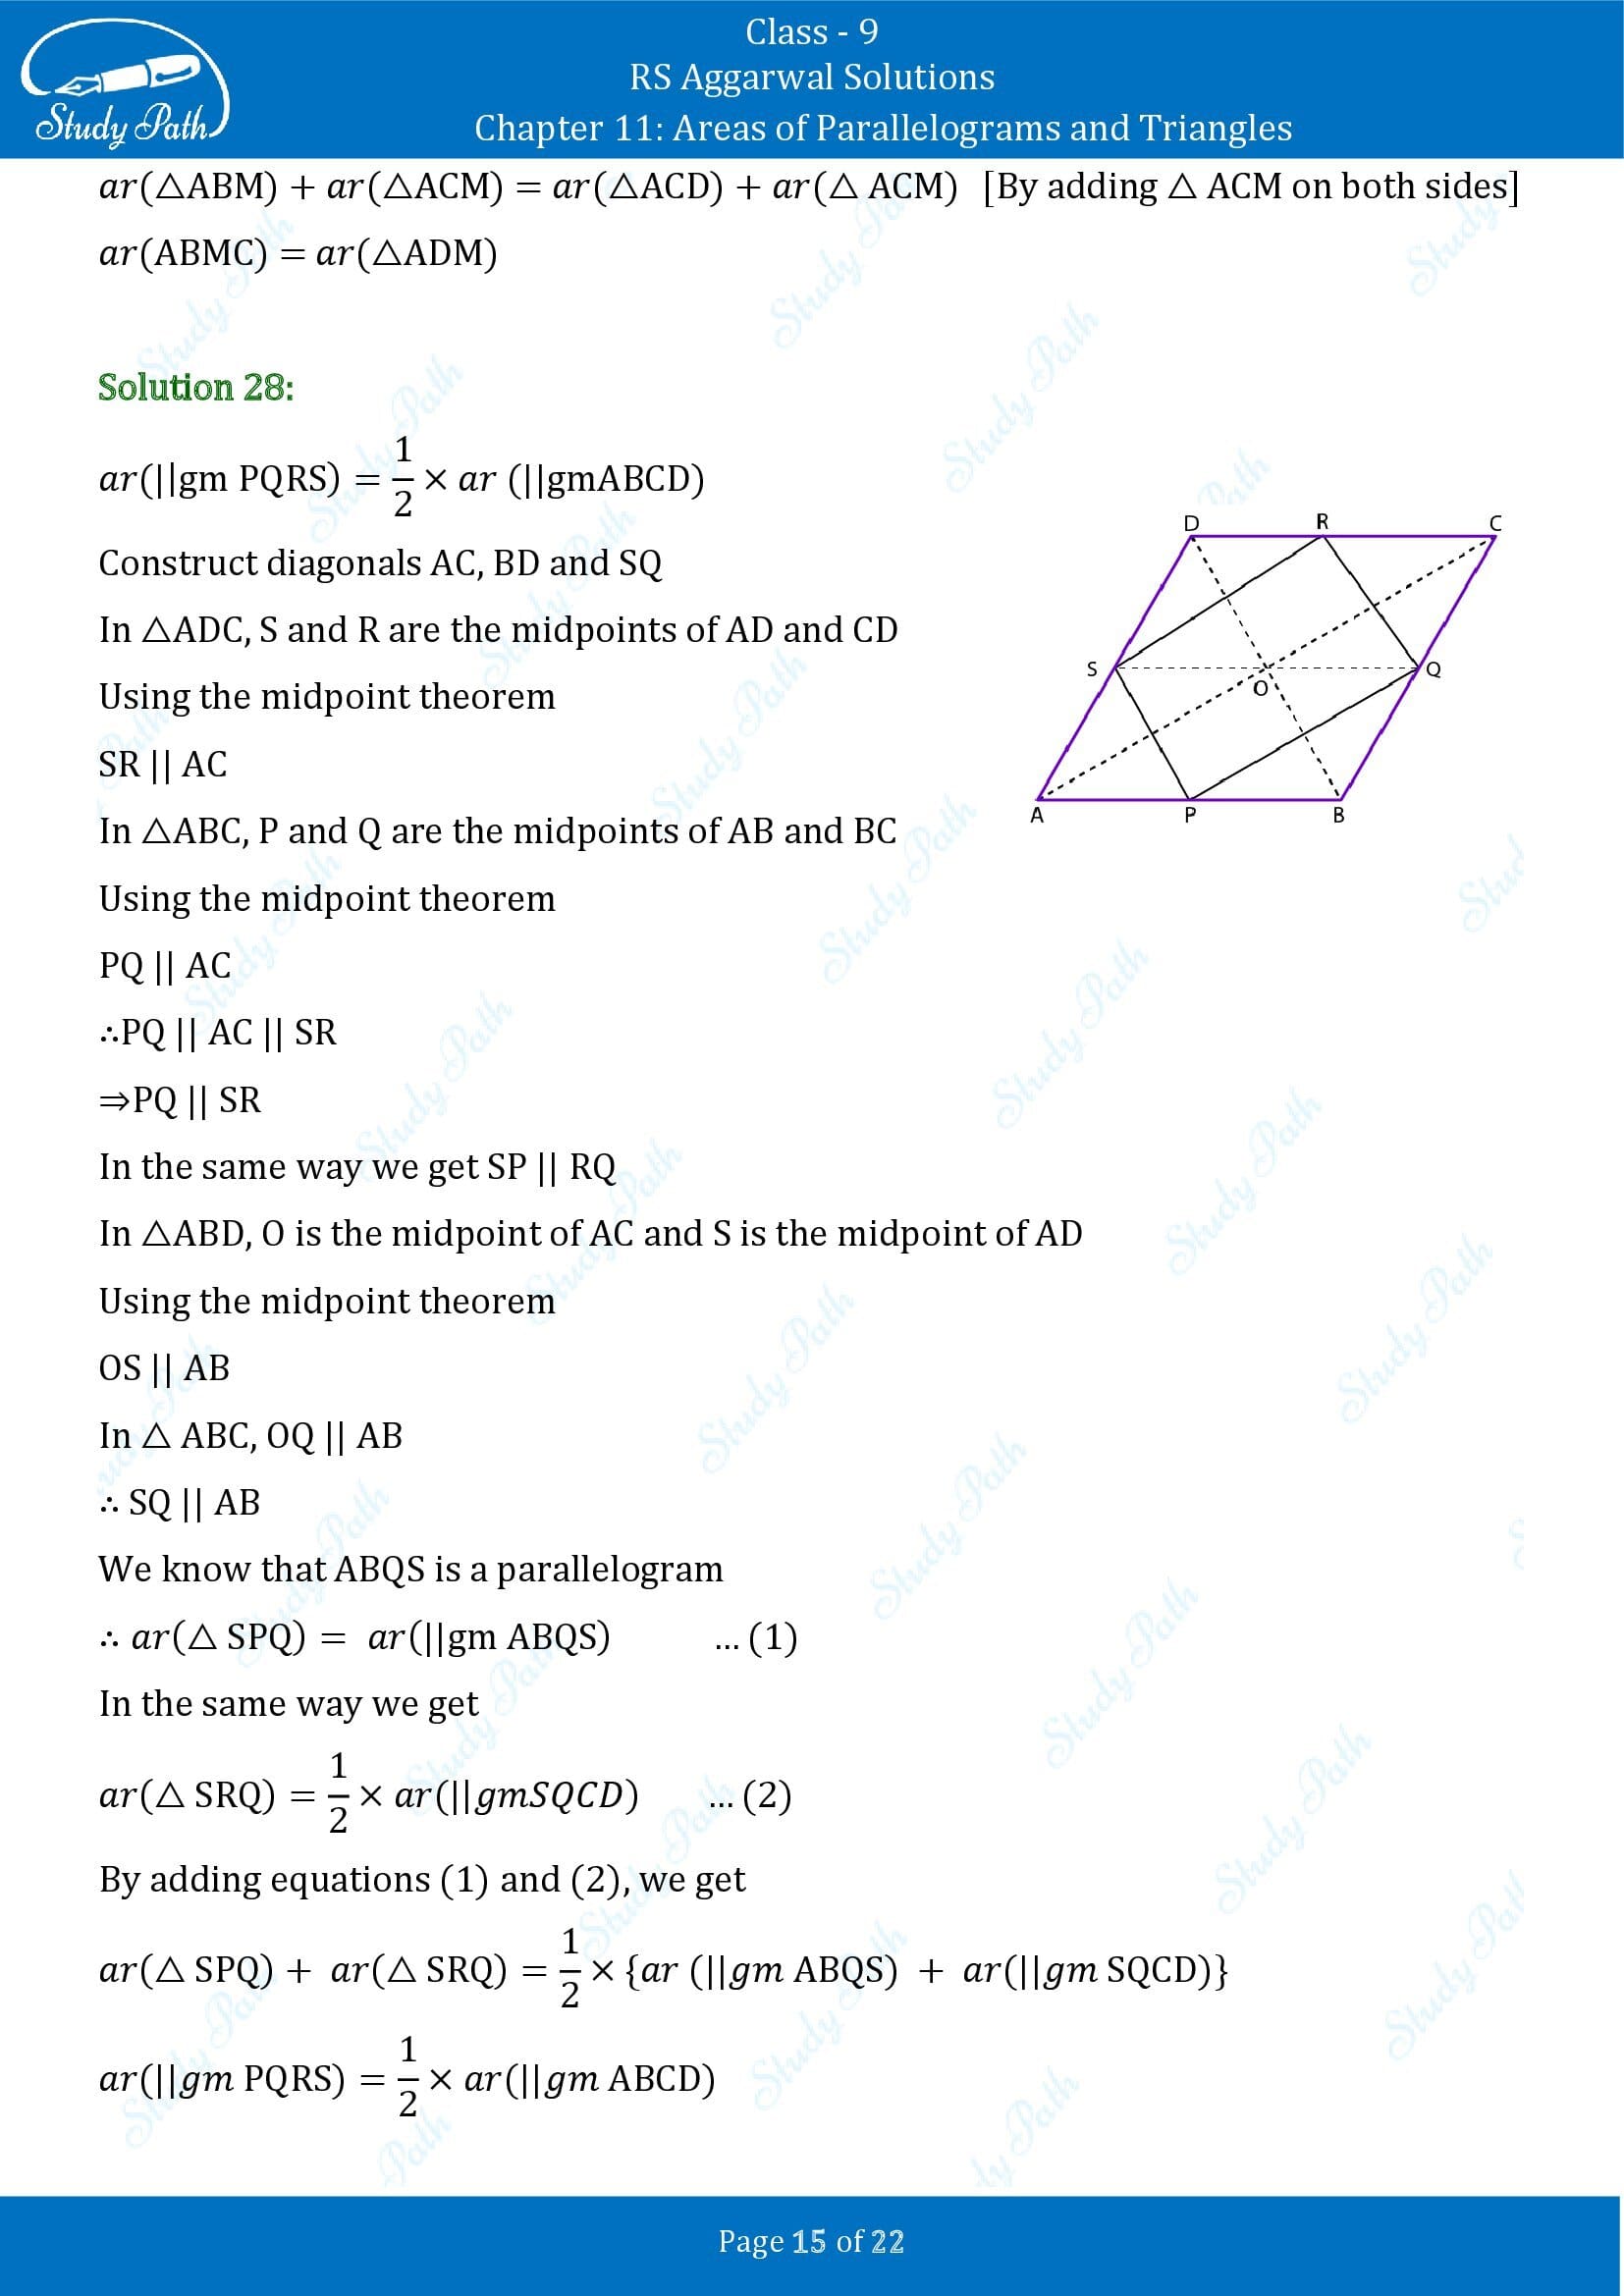 RS Aggarwal Solutions Class 9 Chapter 11 Areas of Parallelograms and Triangles Exercise 11 00015